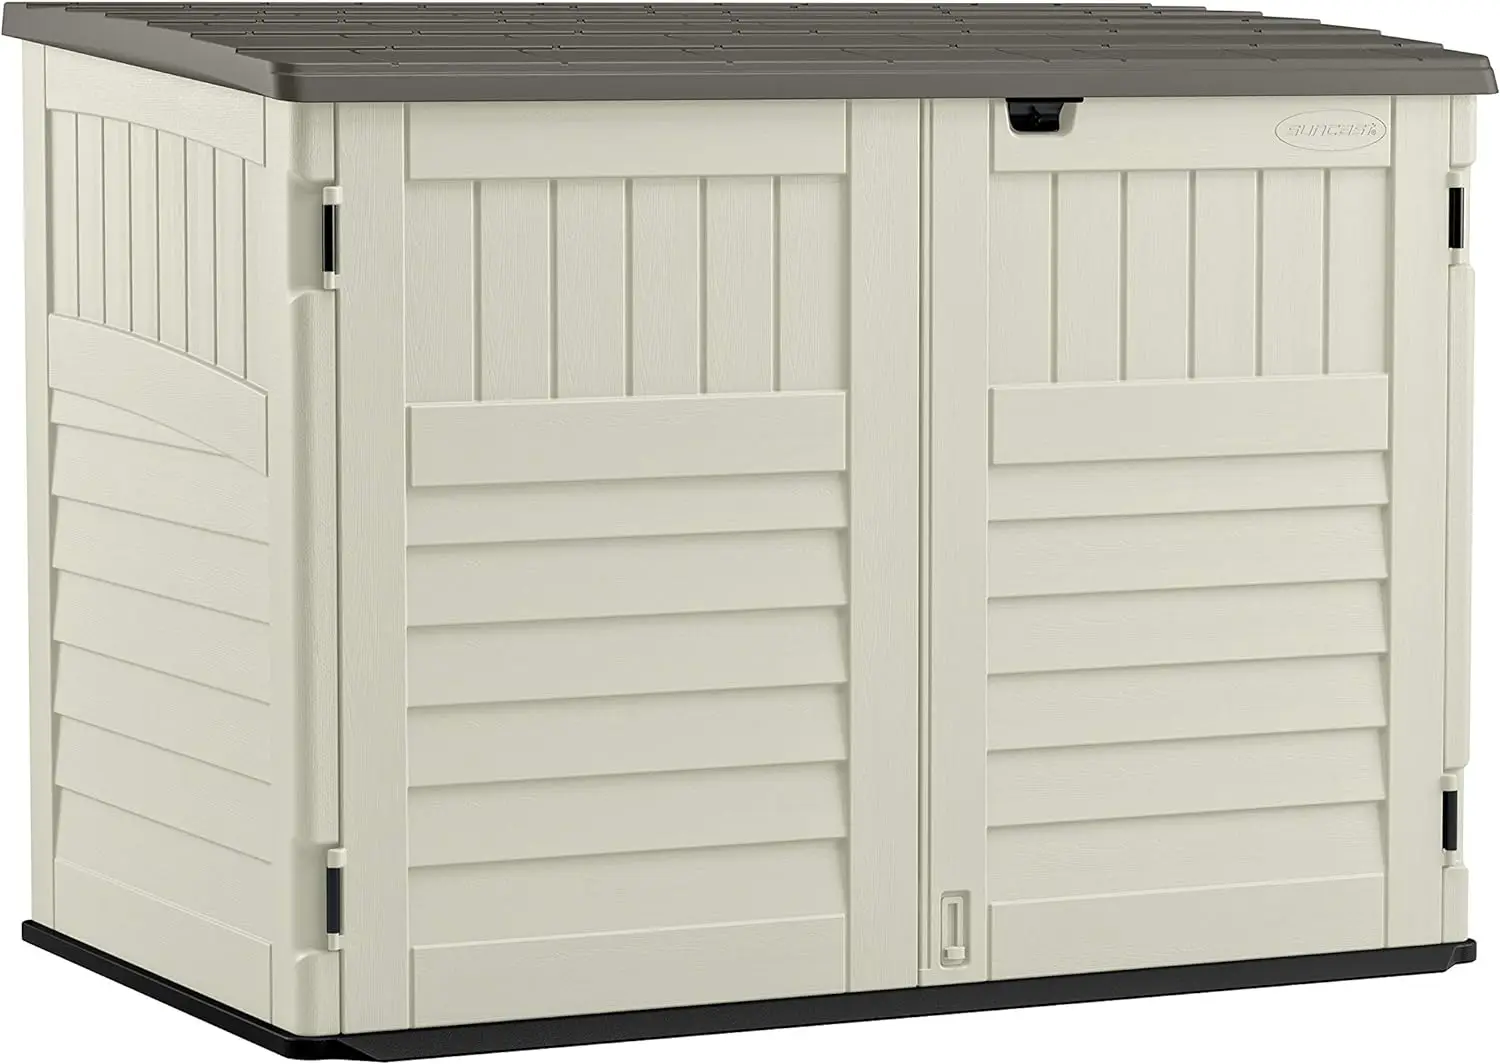 

Horizontal Stow-Away Storage Shed Natural Wood-like Outdoor Storage for Trash Cans and Yard Tools All-Weather Resin